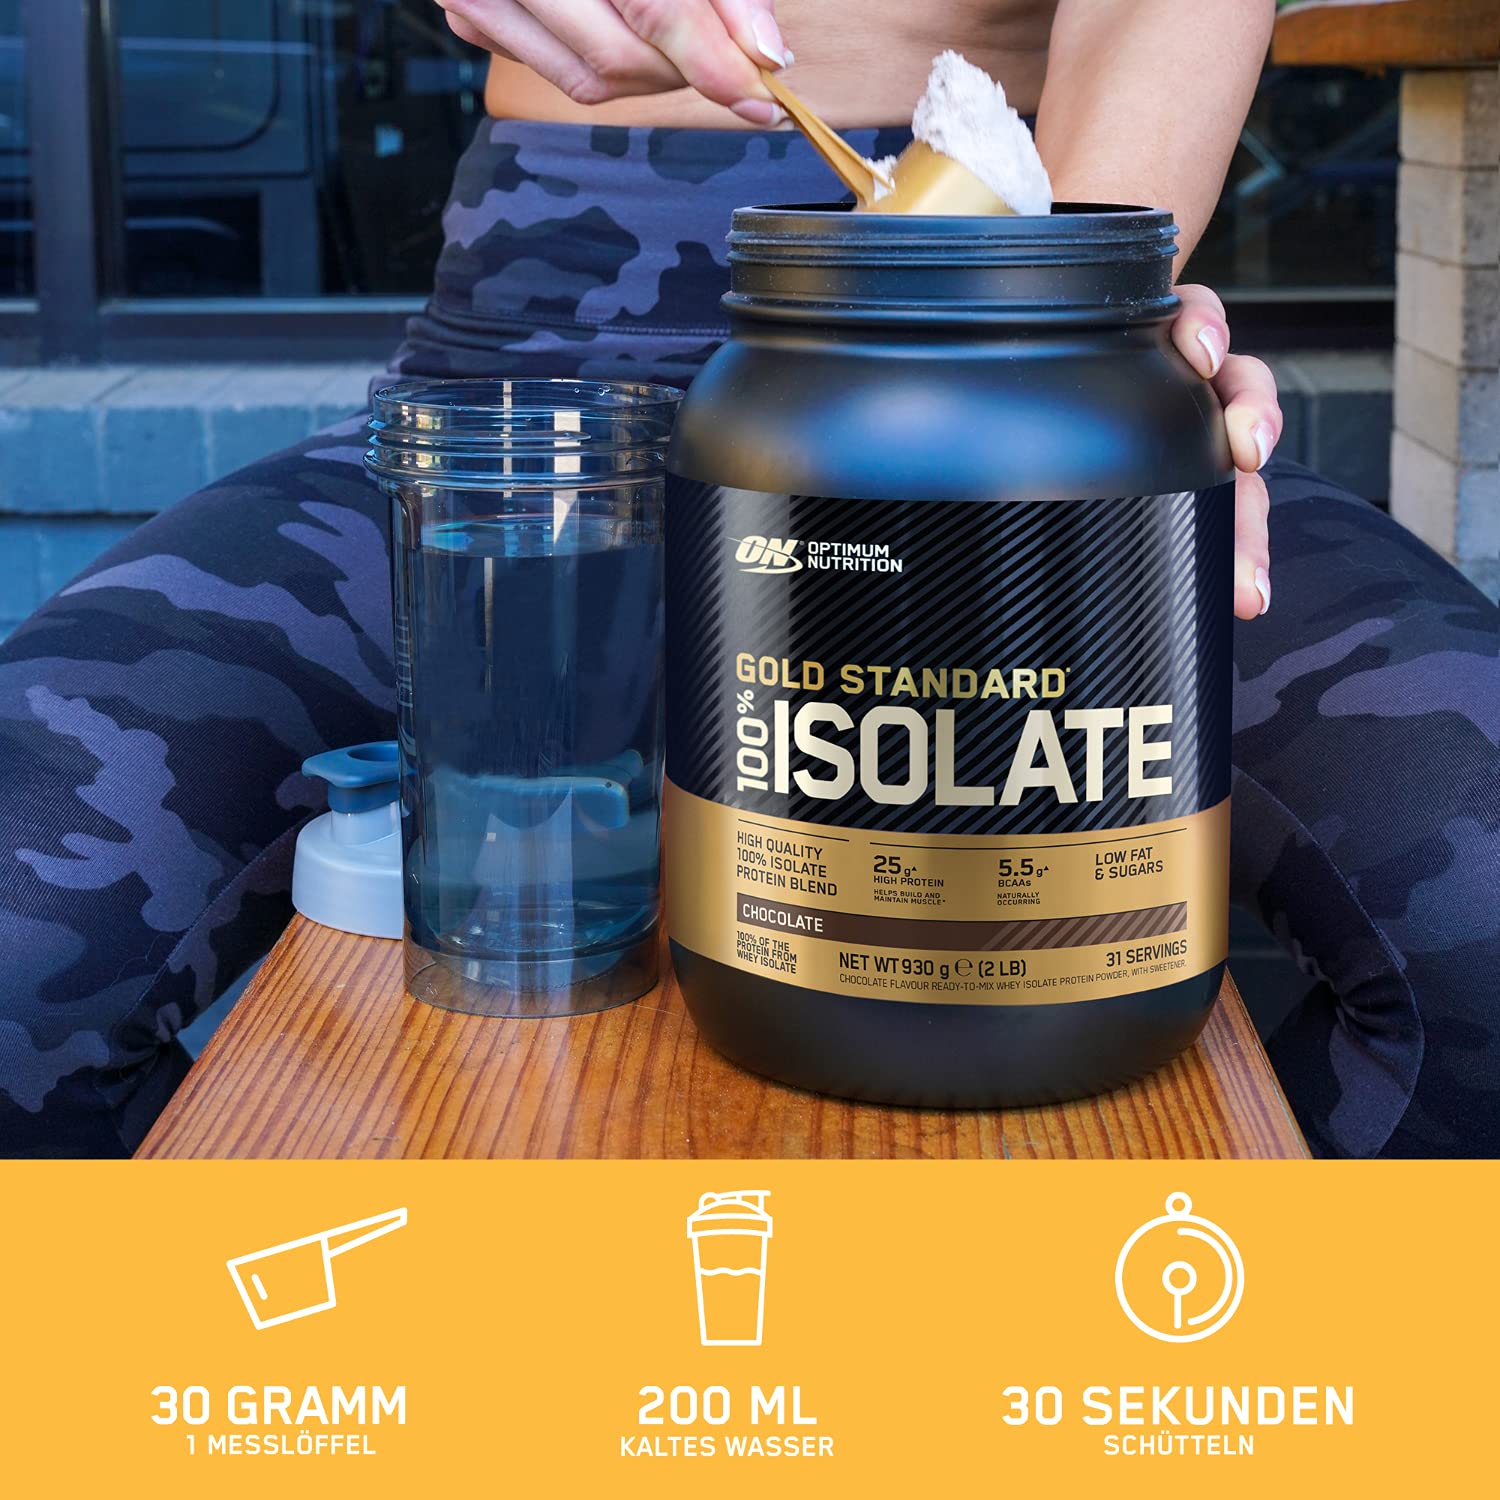 Optimum Nutrition Isolate Protein Suggested Use